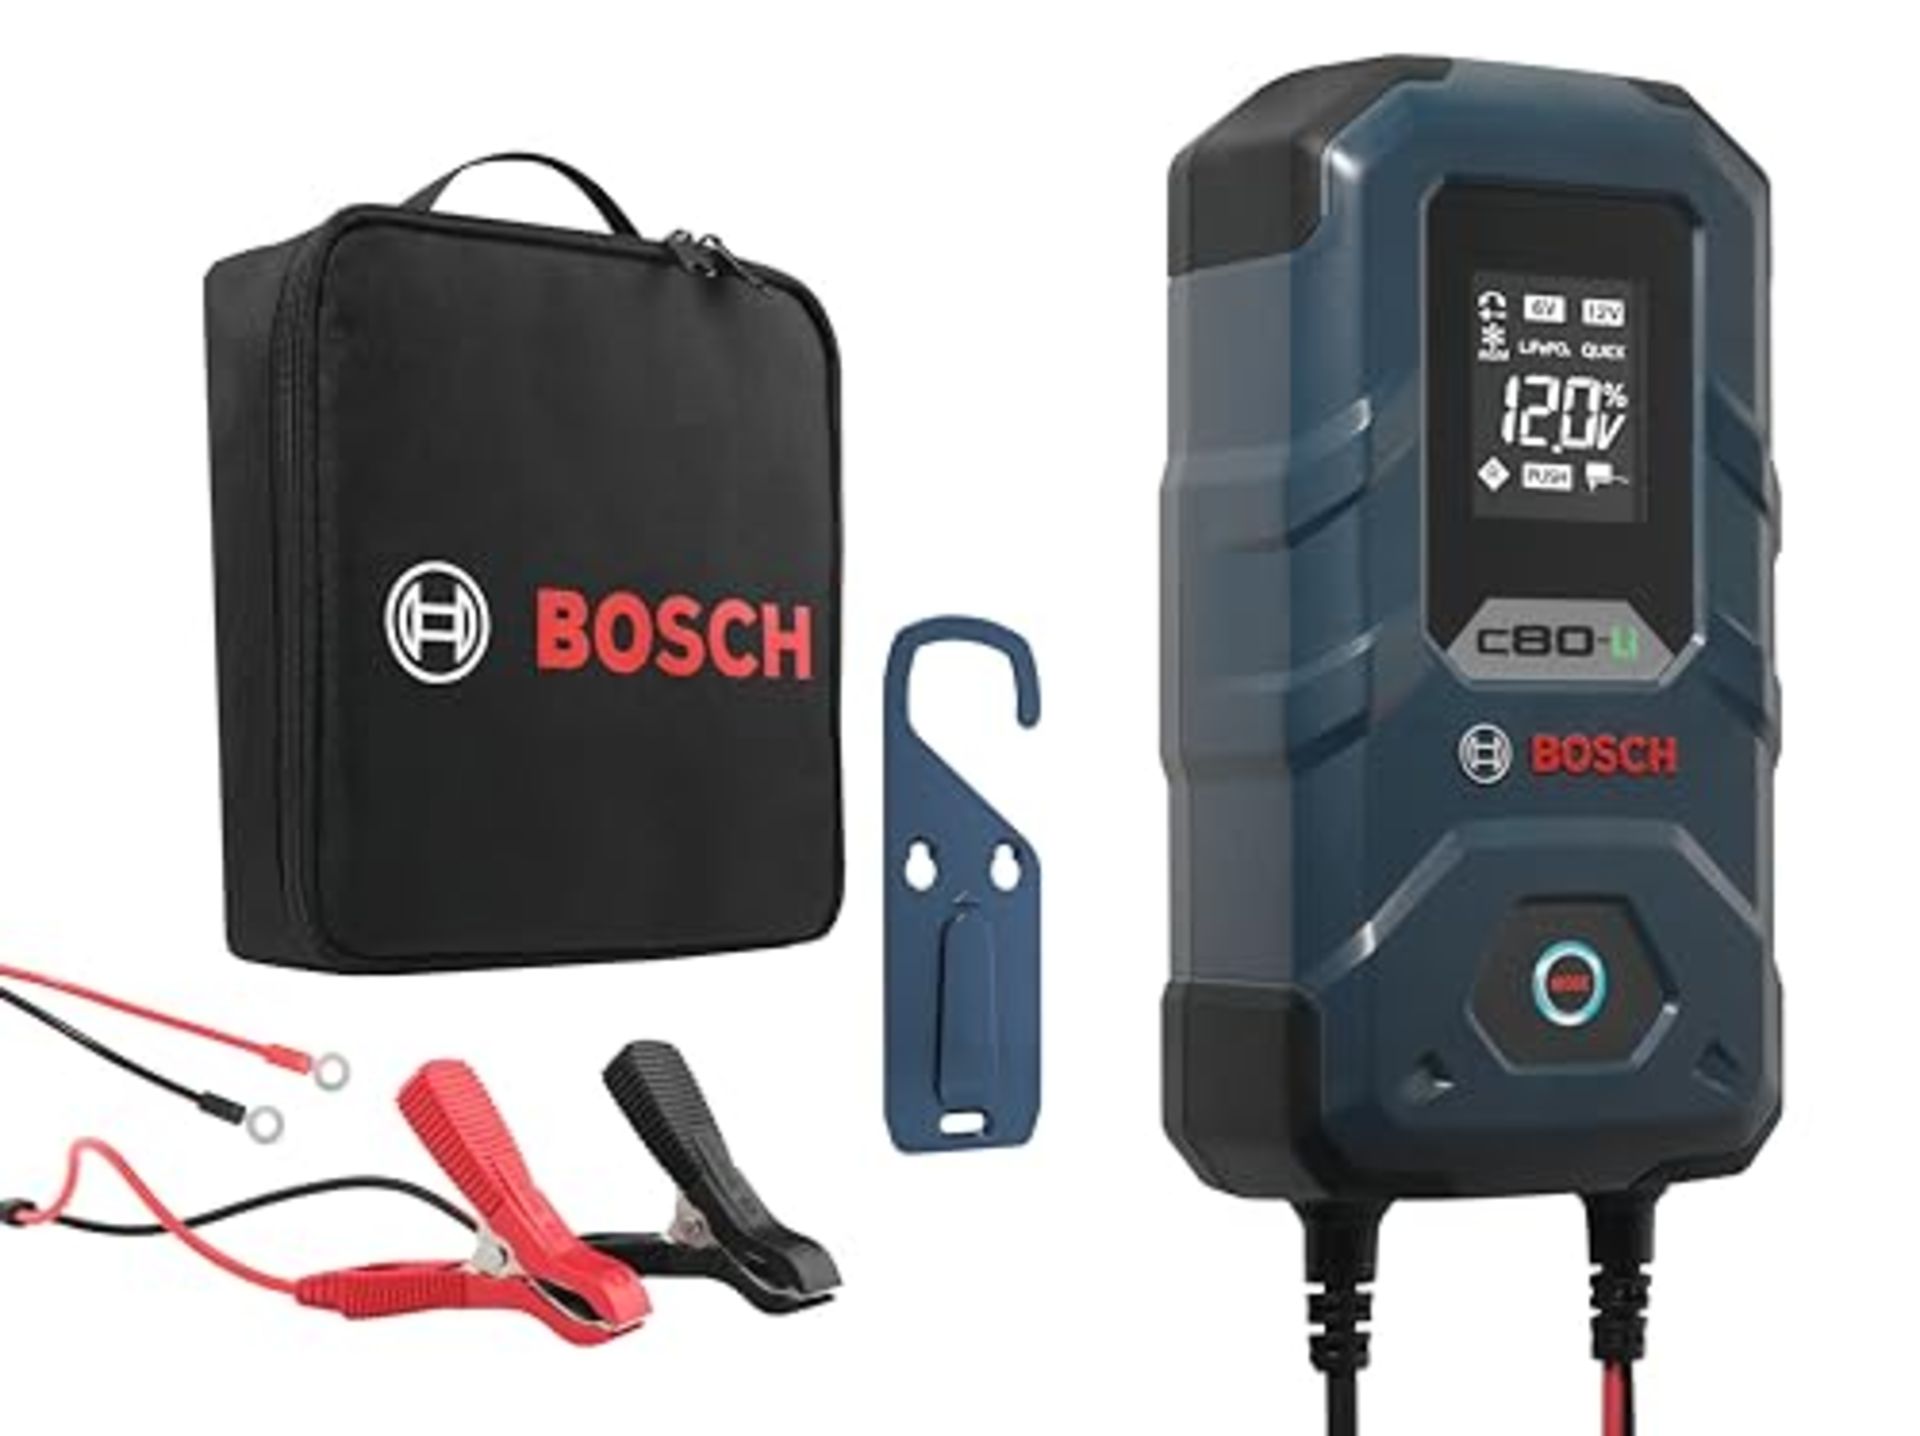 RRP £176.00 Bosch C80-Li Car Battery Charger 12V - 15 Amps, With Trickle Function - For Charging L